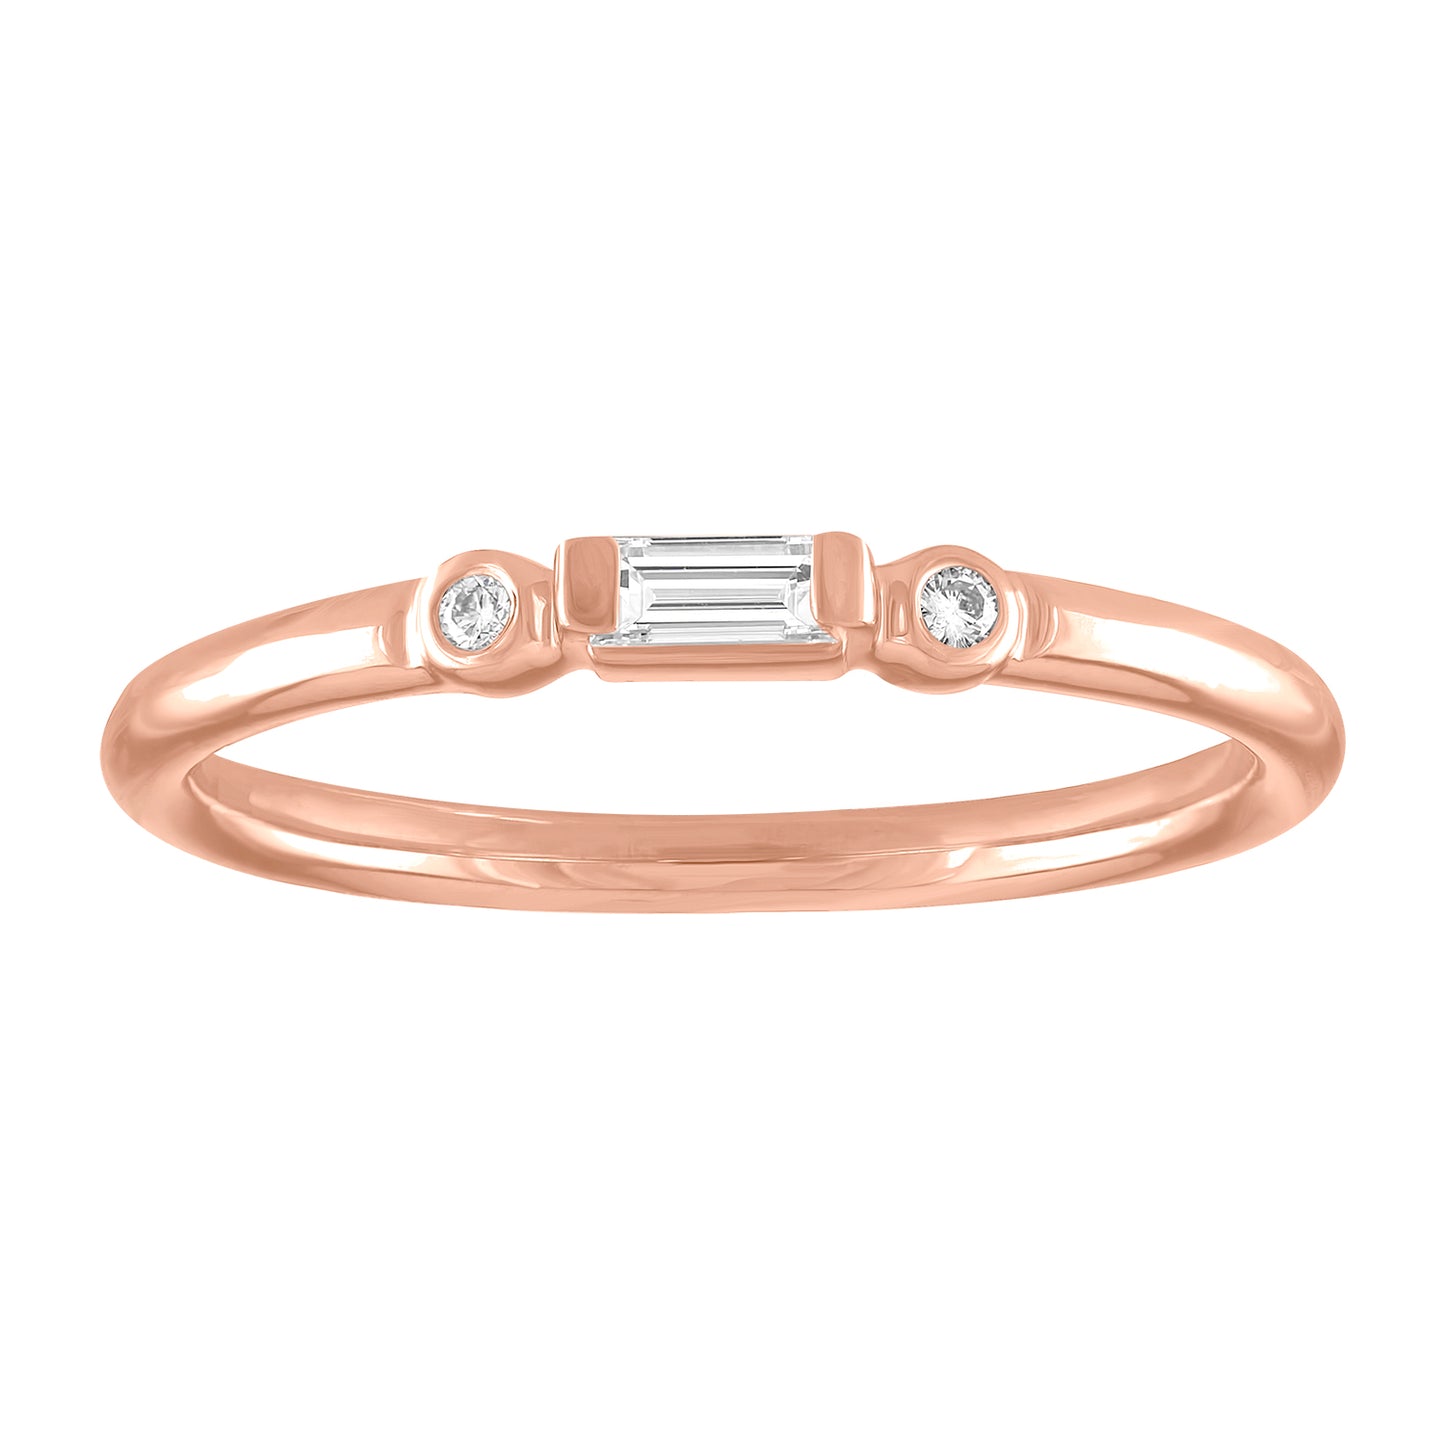 Rose gold skinny band with a diamond baguette in the center and two round diamonds on the side. 